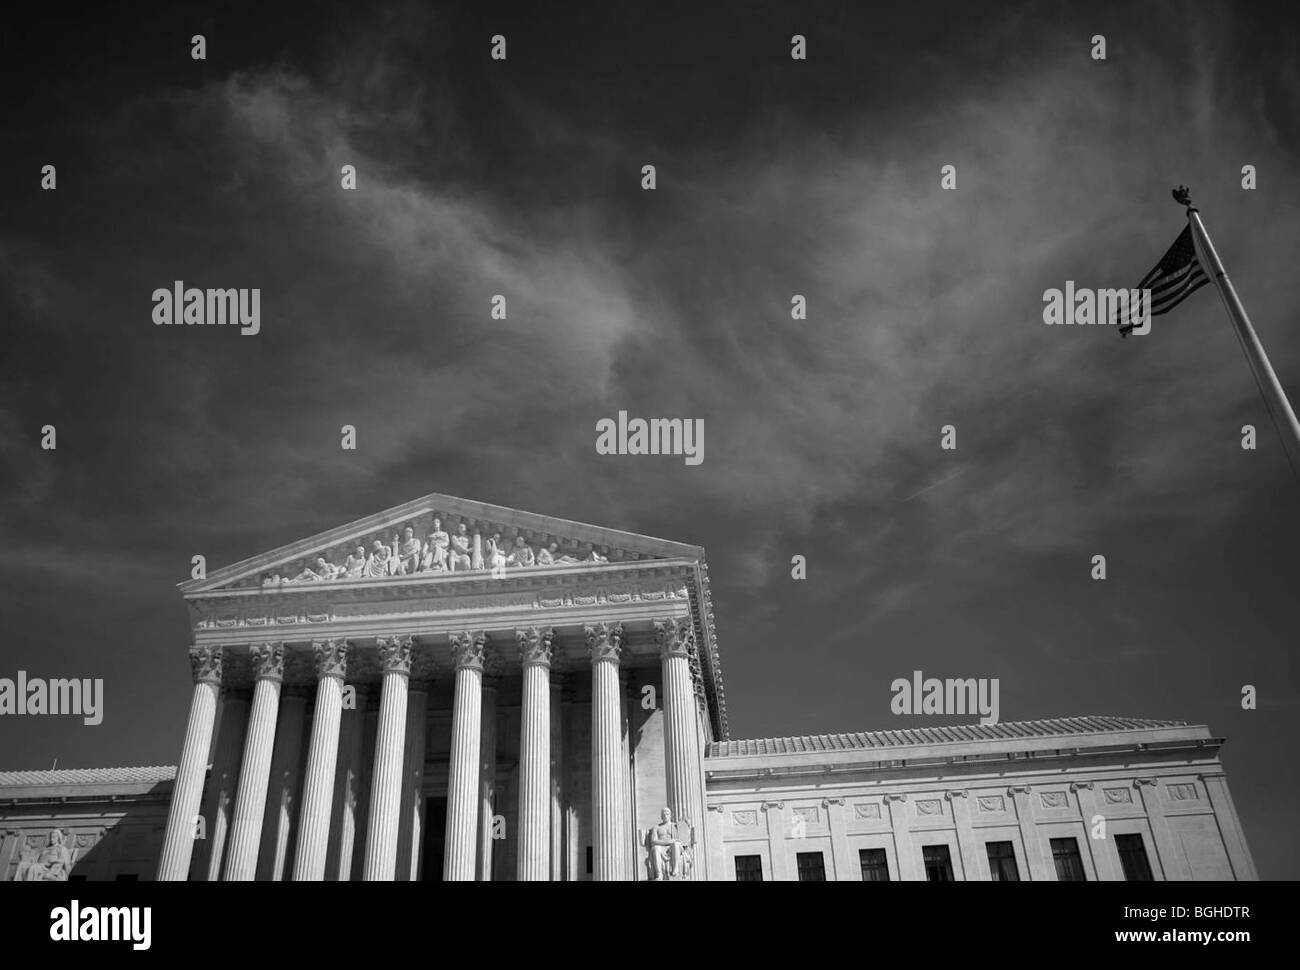 A view of the United States Supreme Court Building.  Stock Photo